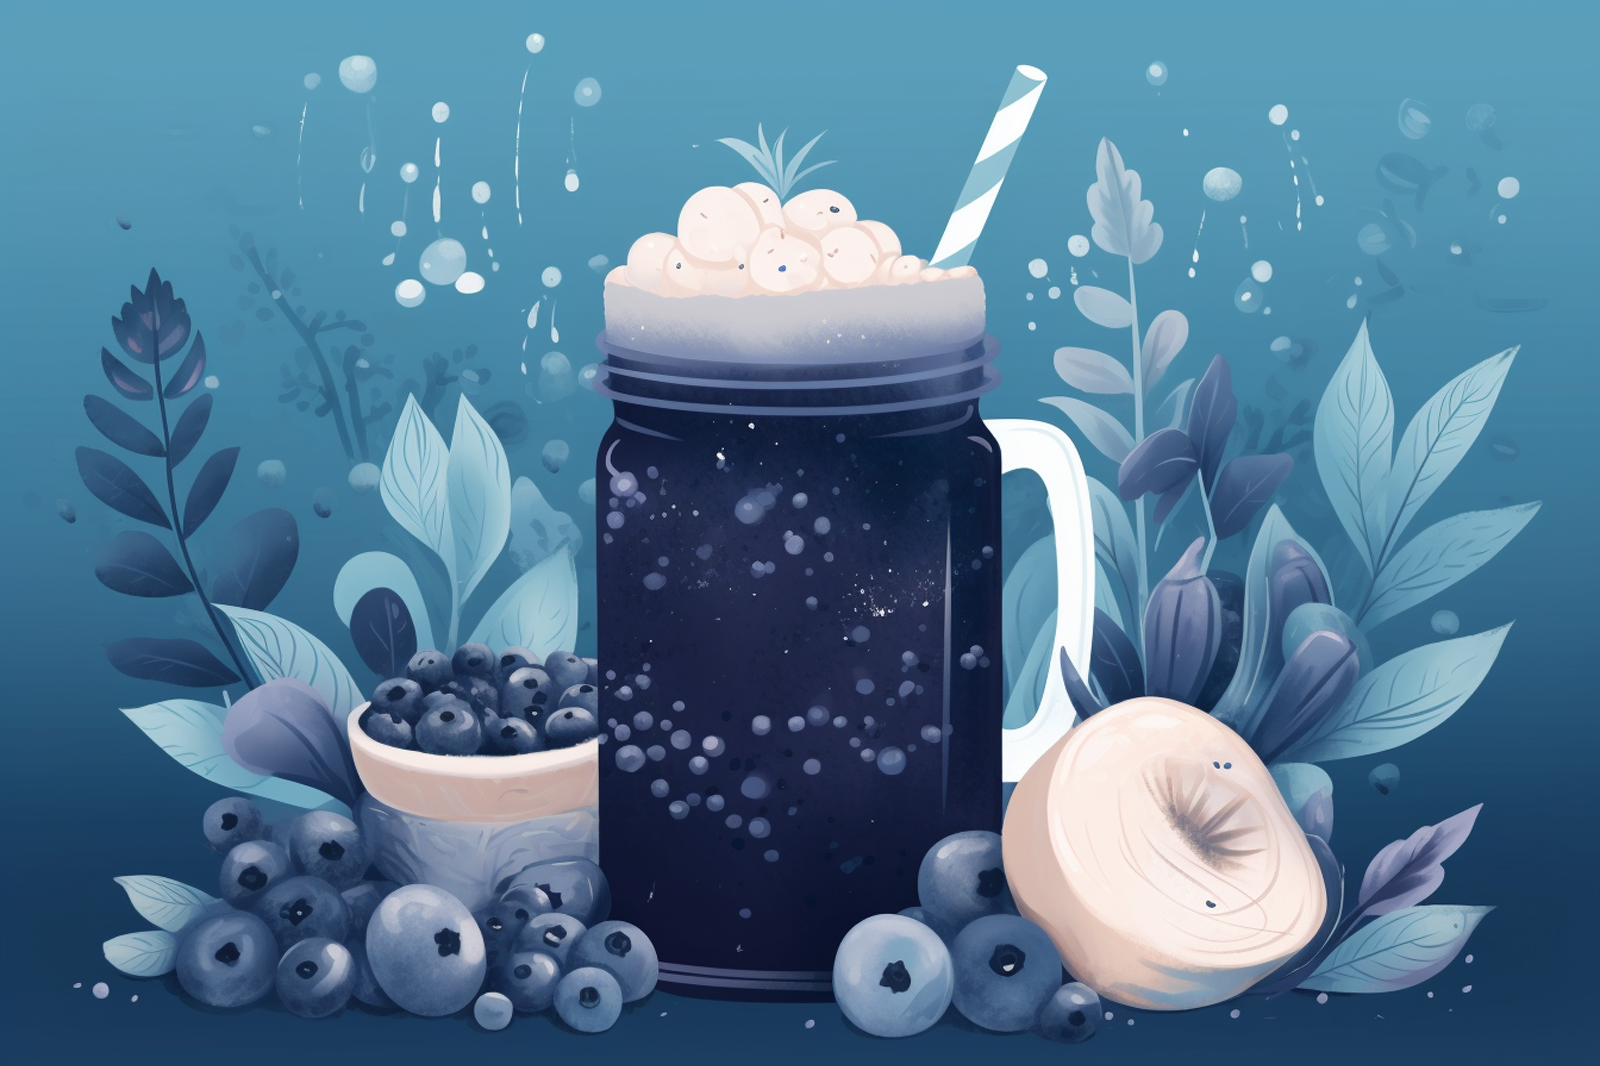 Illustration of a Blueberry Smoothie with blueberries and mushrooms beside it.